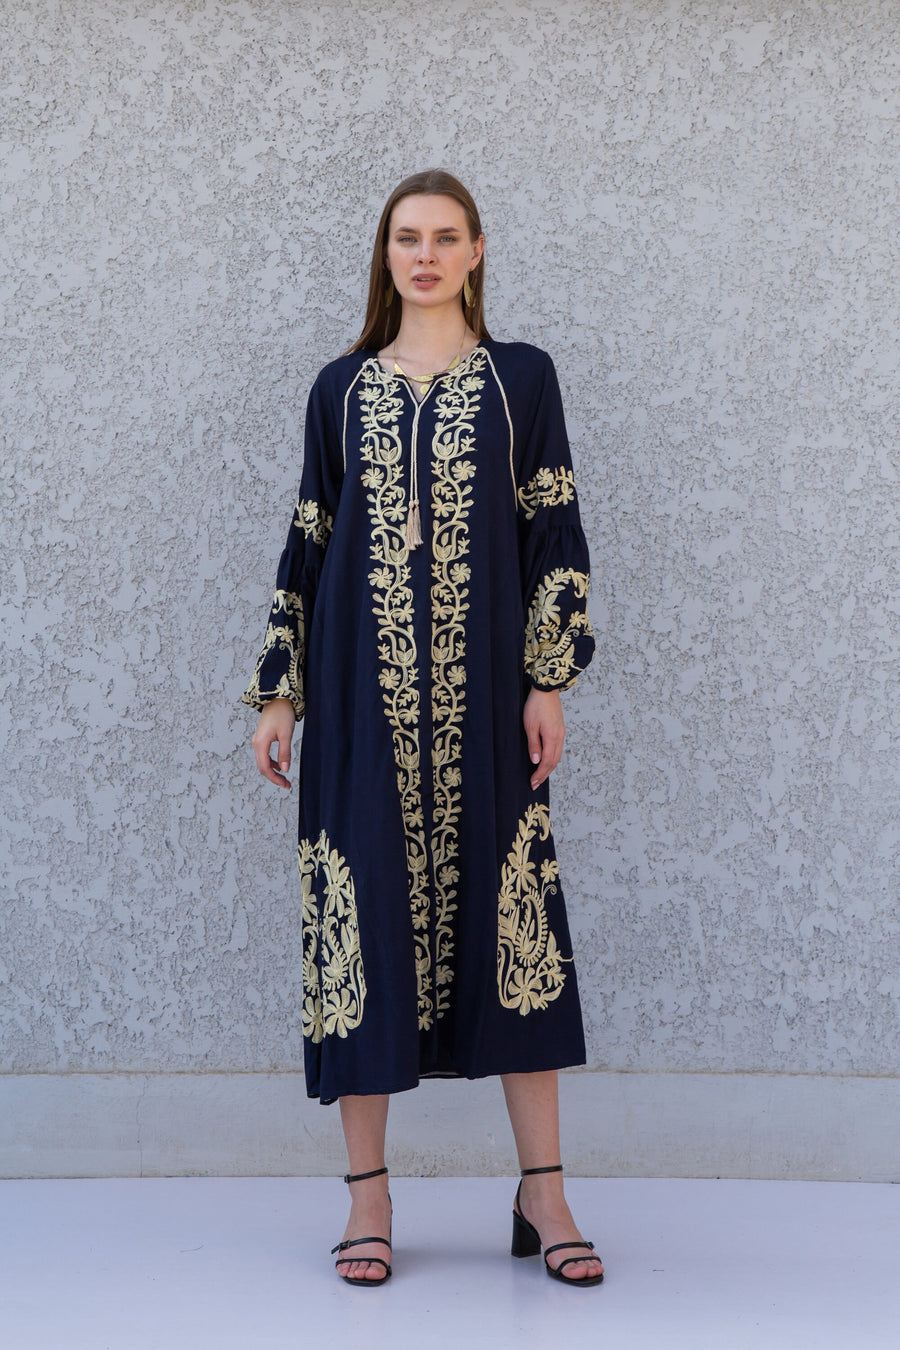 Ethnic embroidered navy blue cotton kaftan dress, tunic dress, caftans for women, Egyptian cotton. Summer caftan, party, casual, home dress